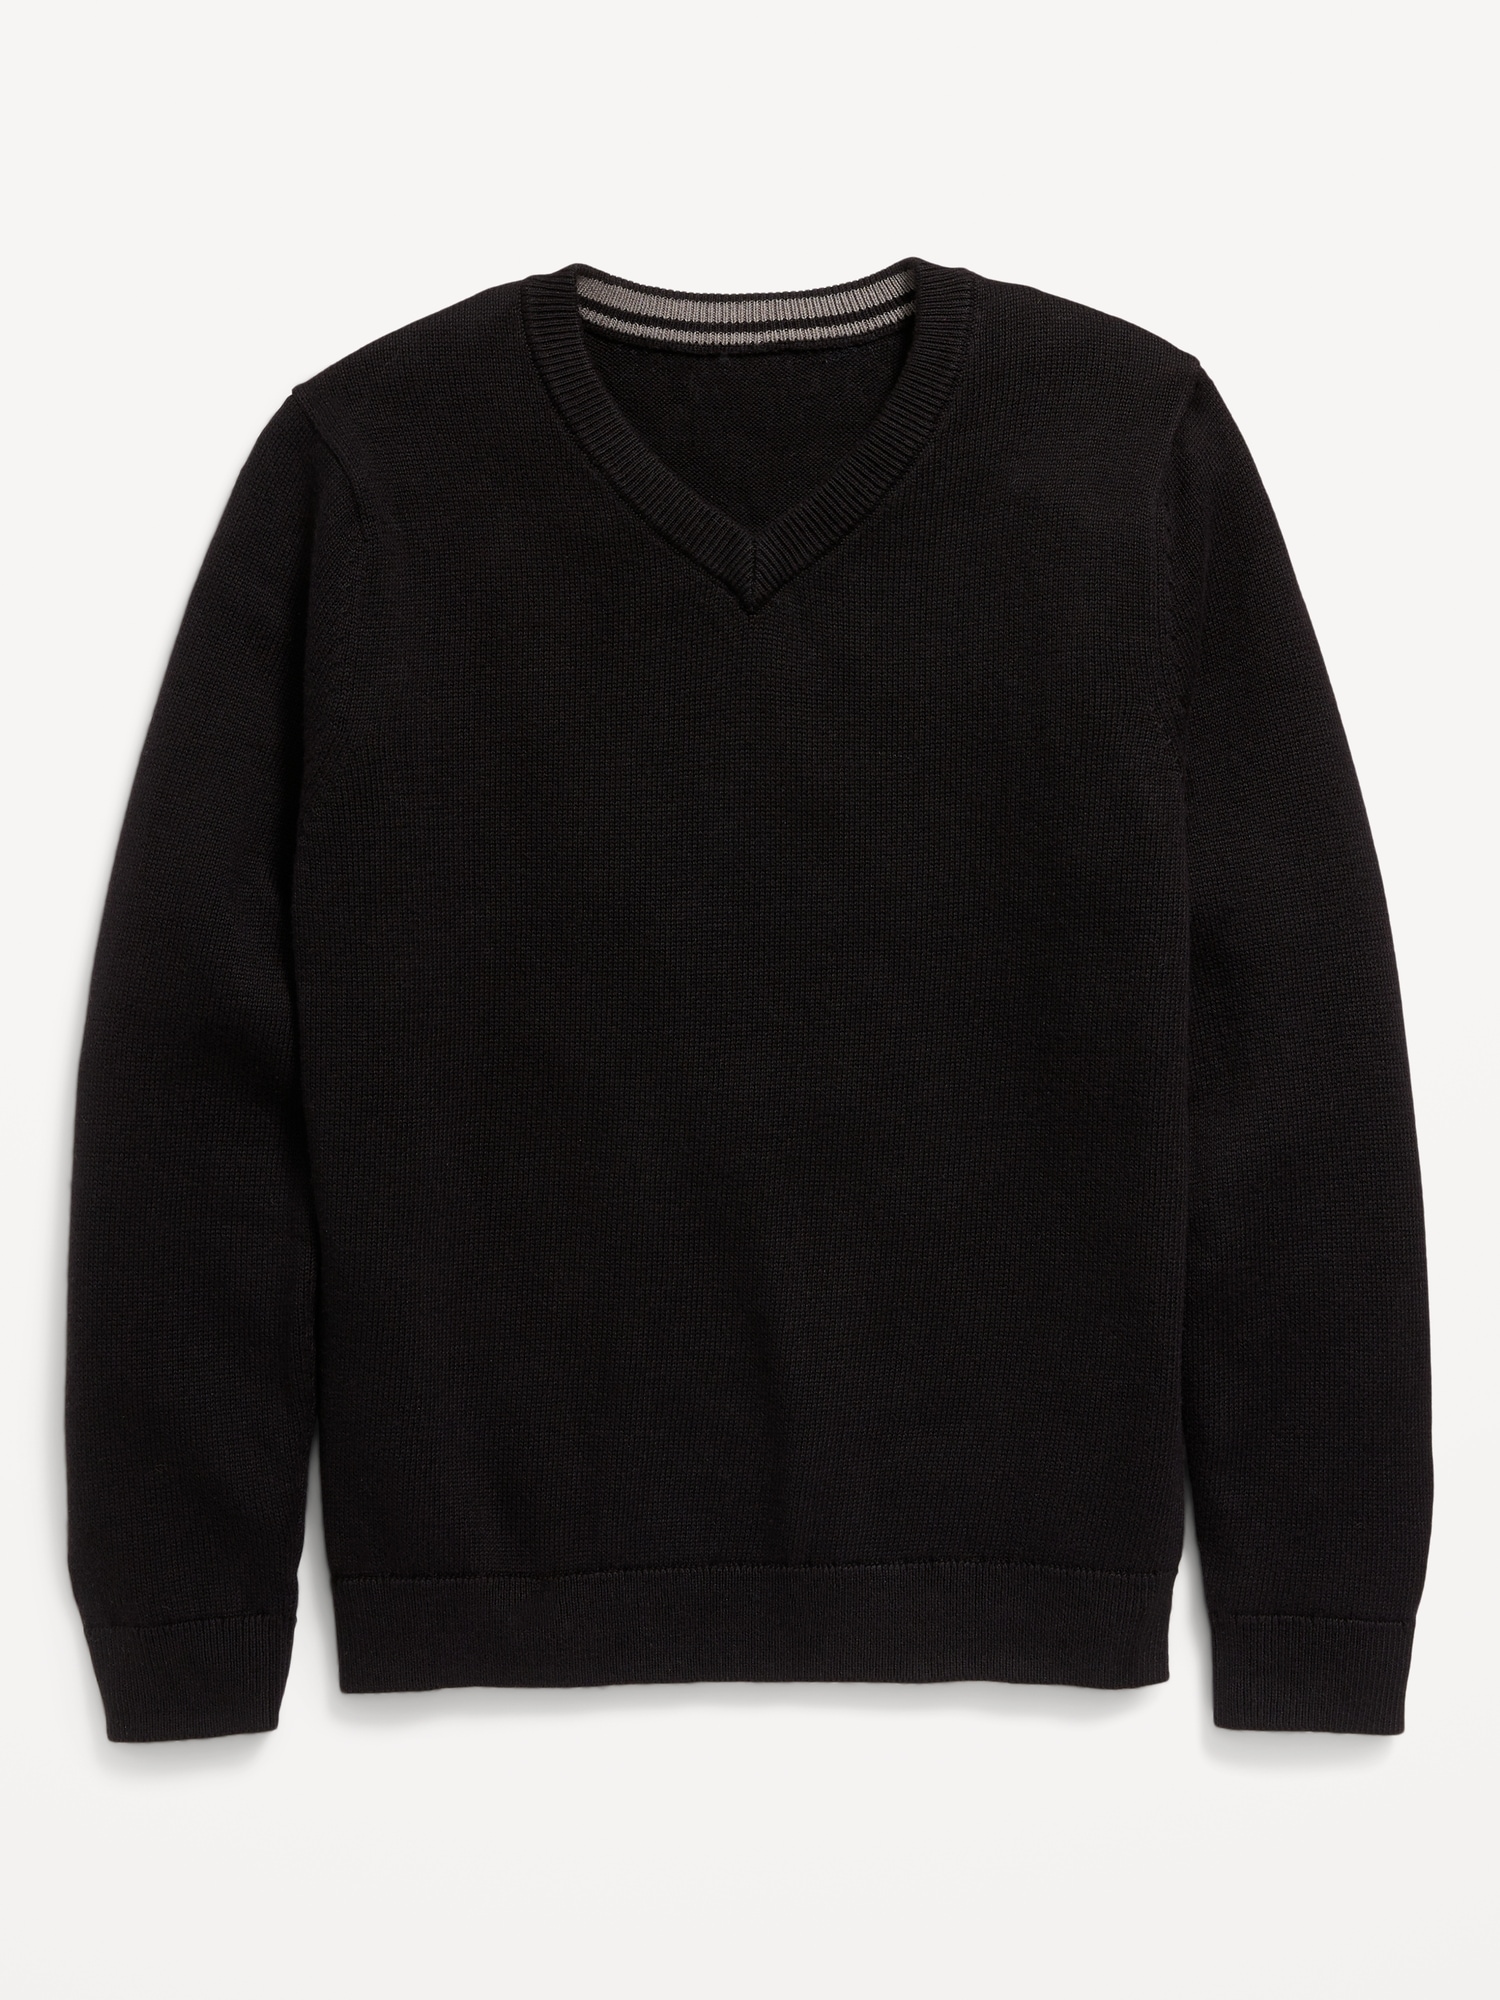 Long-Sleeve Solid V-Neck Sweater for Boys Hot Deal